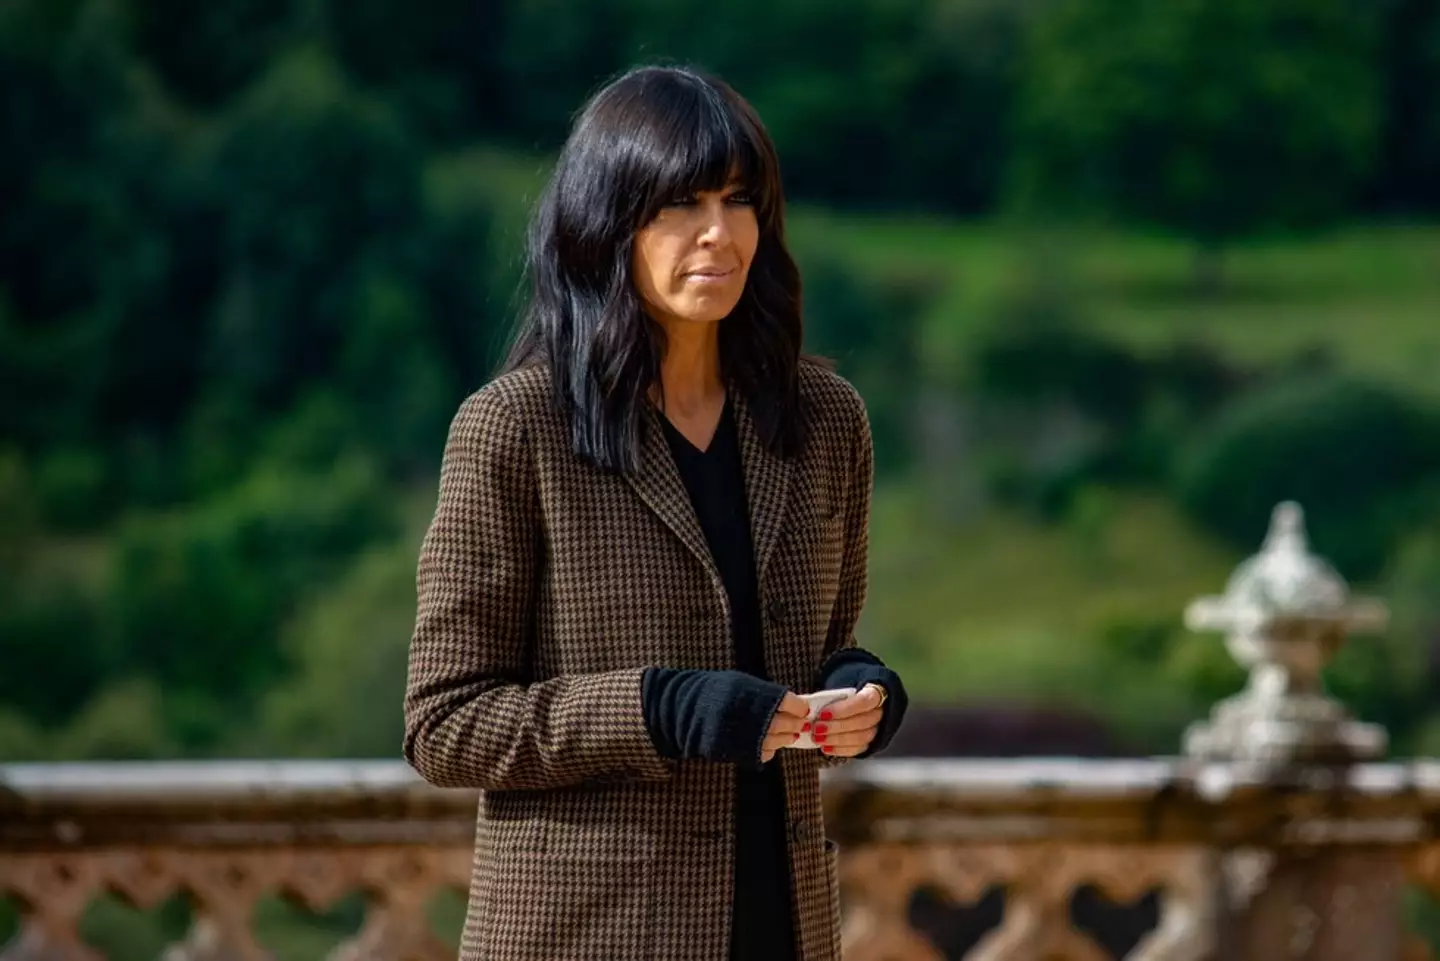 Claudia Winkleman - and her tan - are back on screens with season two of The Traitors.